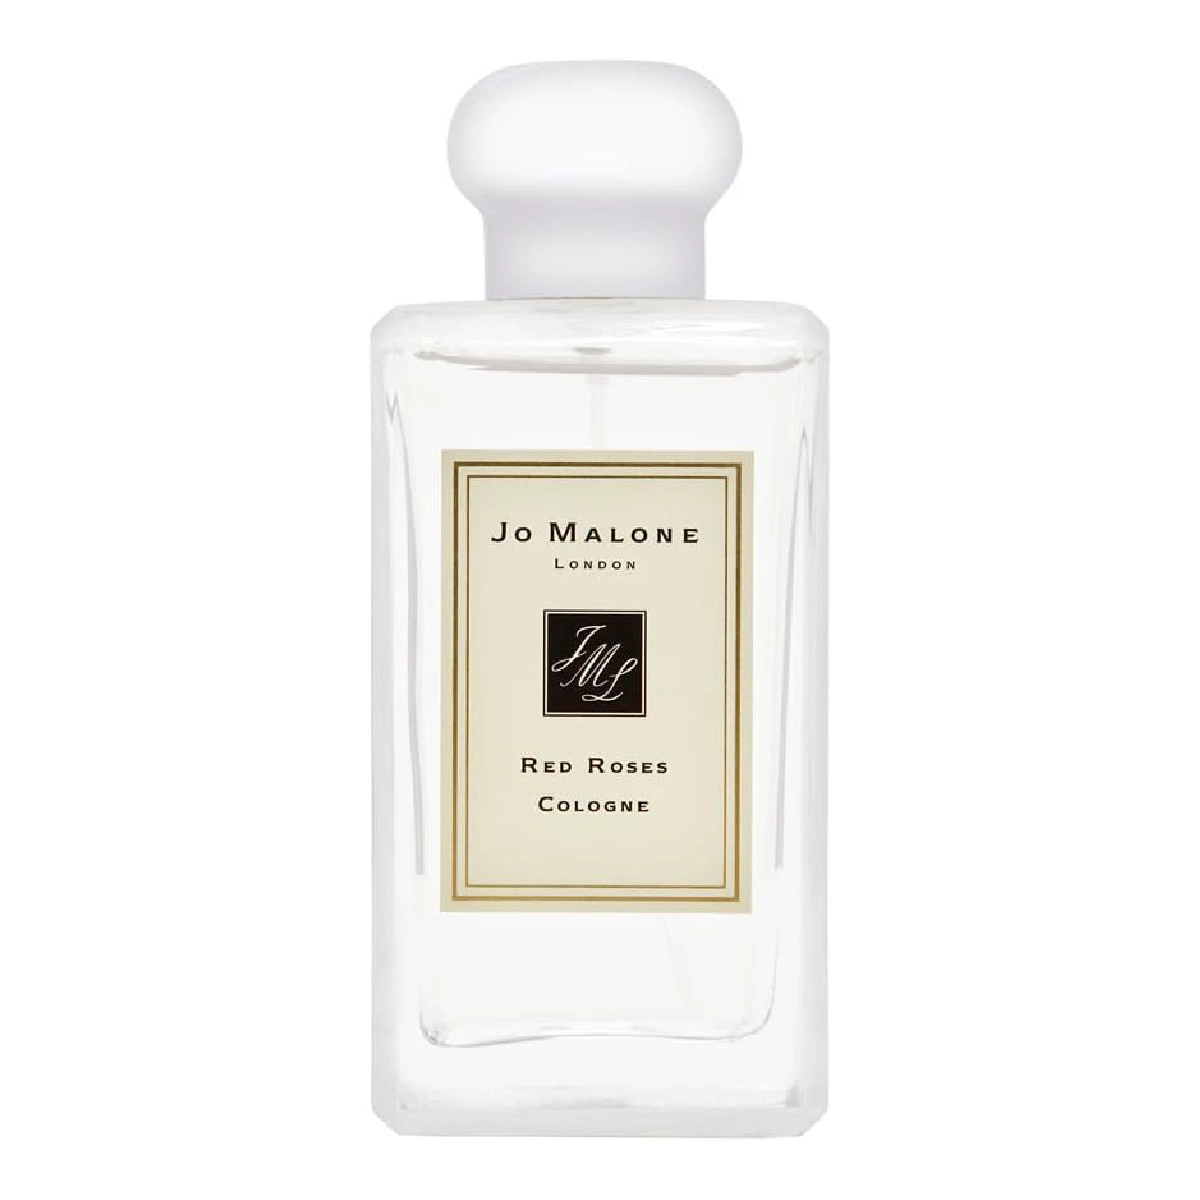 Jo Malone Red Roses perfume bottle against a pristine white background